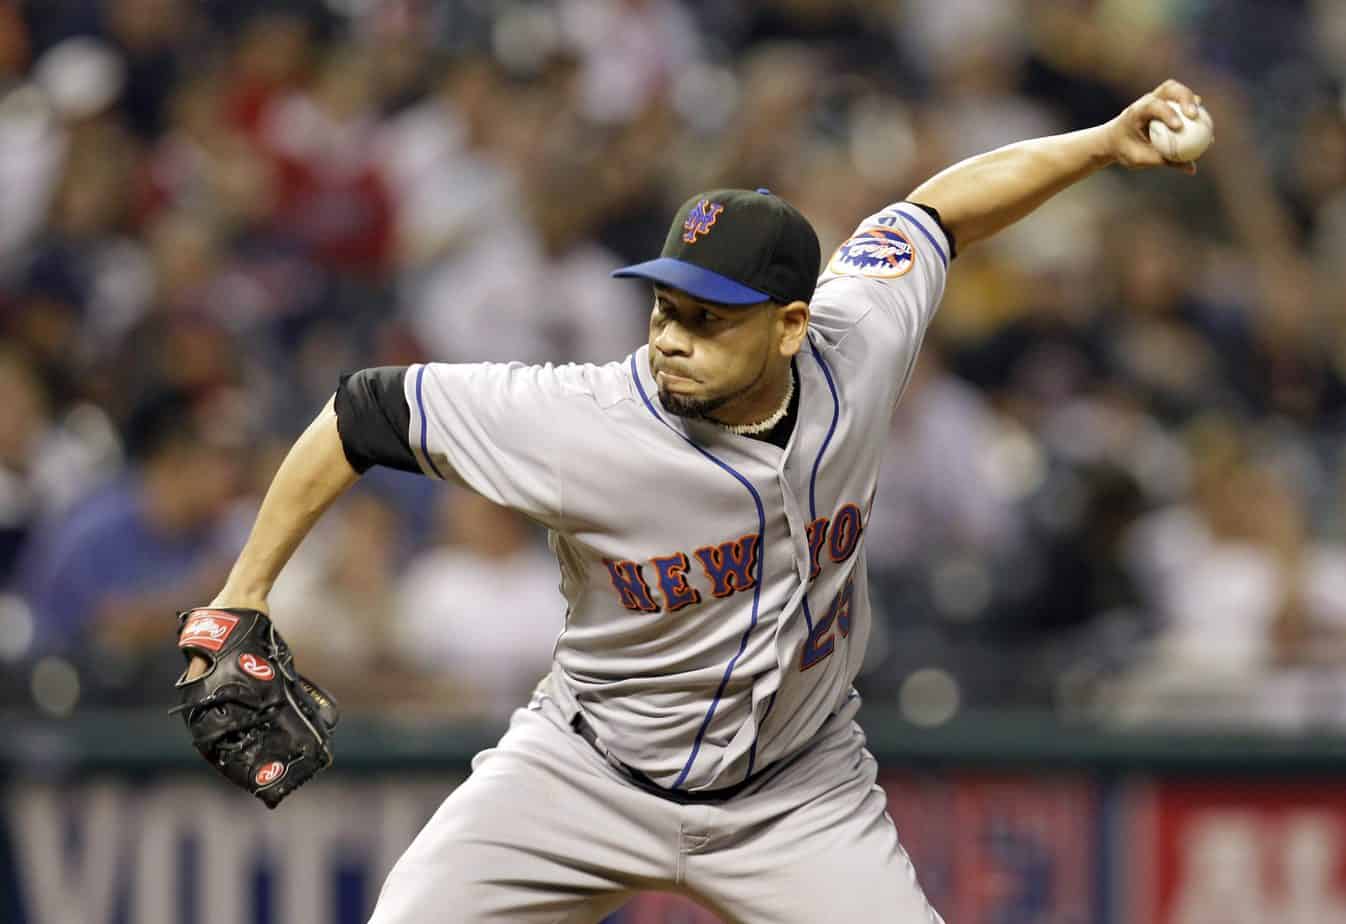 The MLB community joined together to mourn the loss of longtime New York Mets reliever Pedro Feliciano on Monday after it was announced he passed away in his sleep